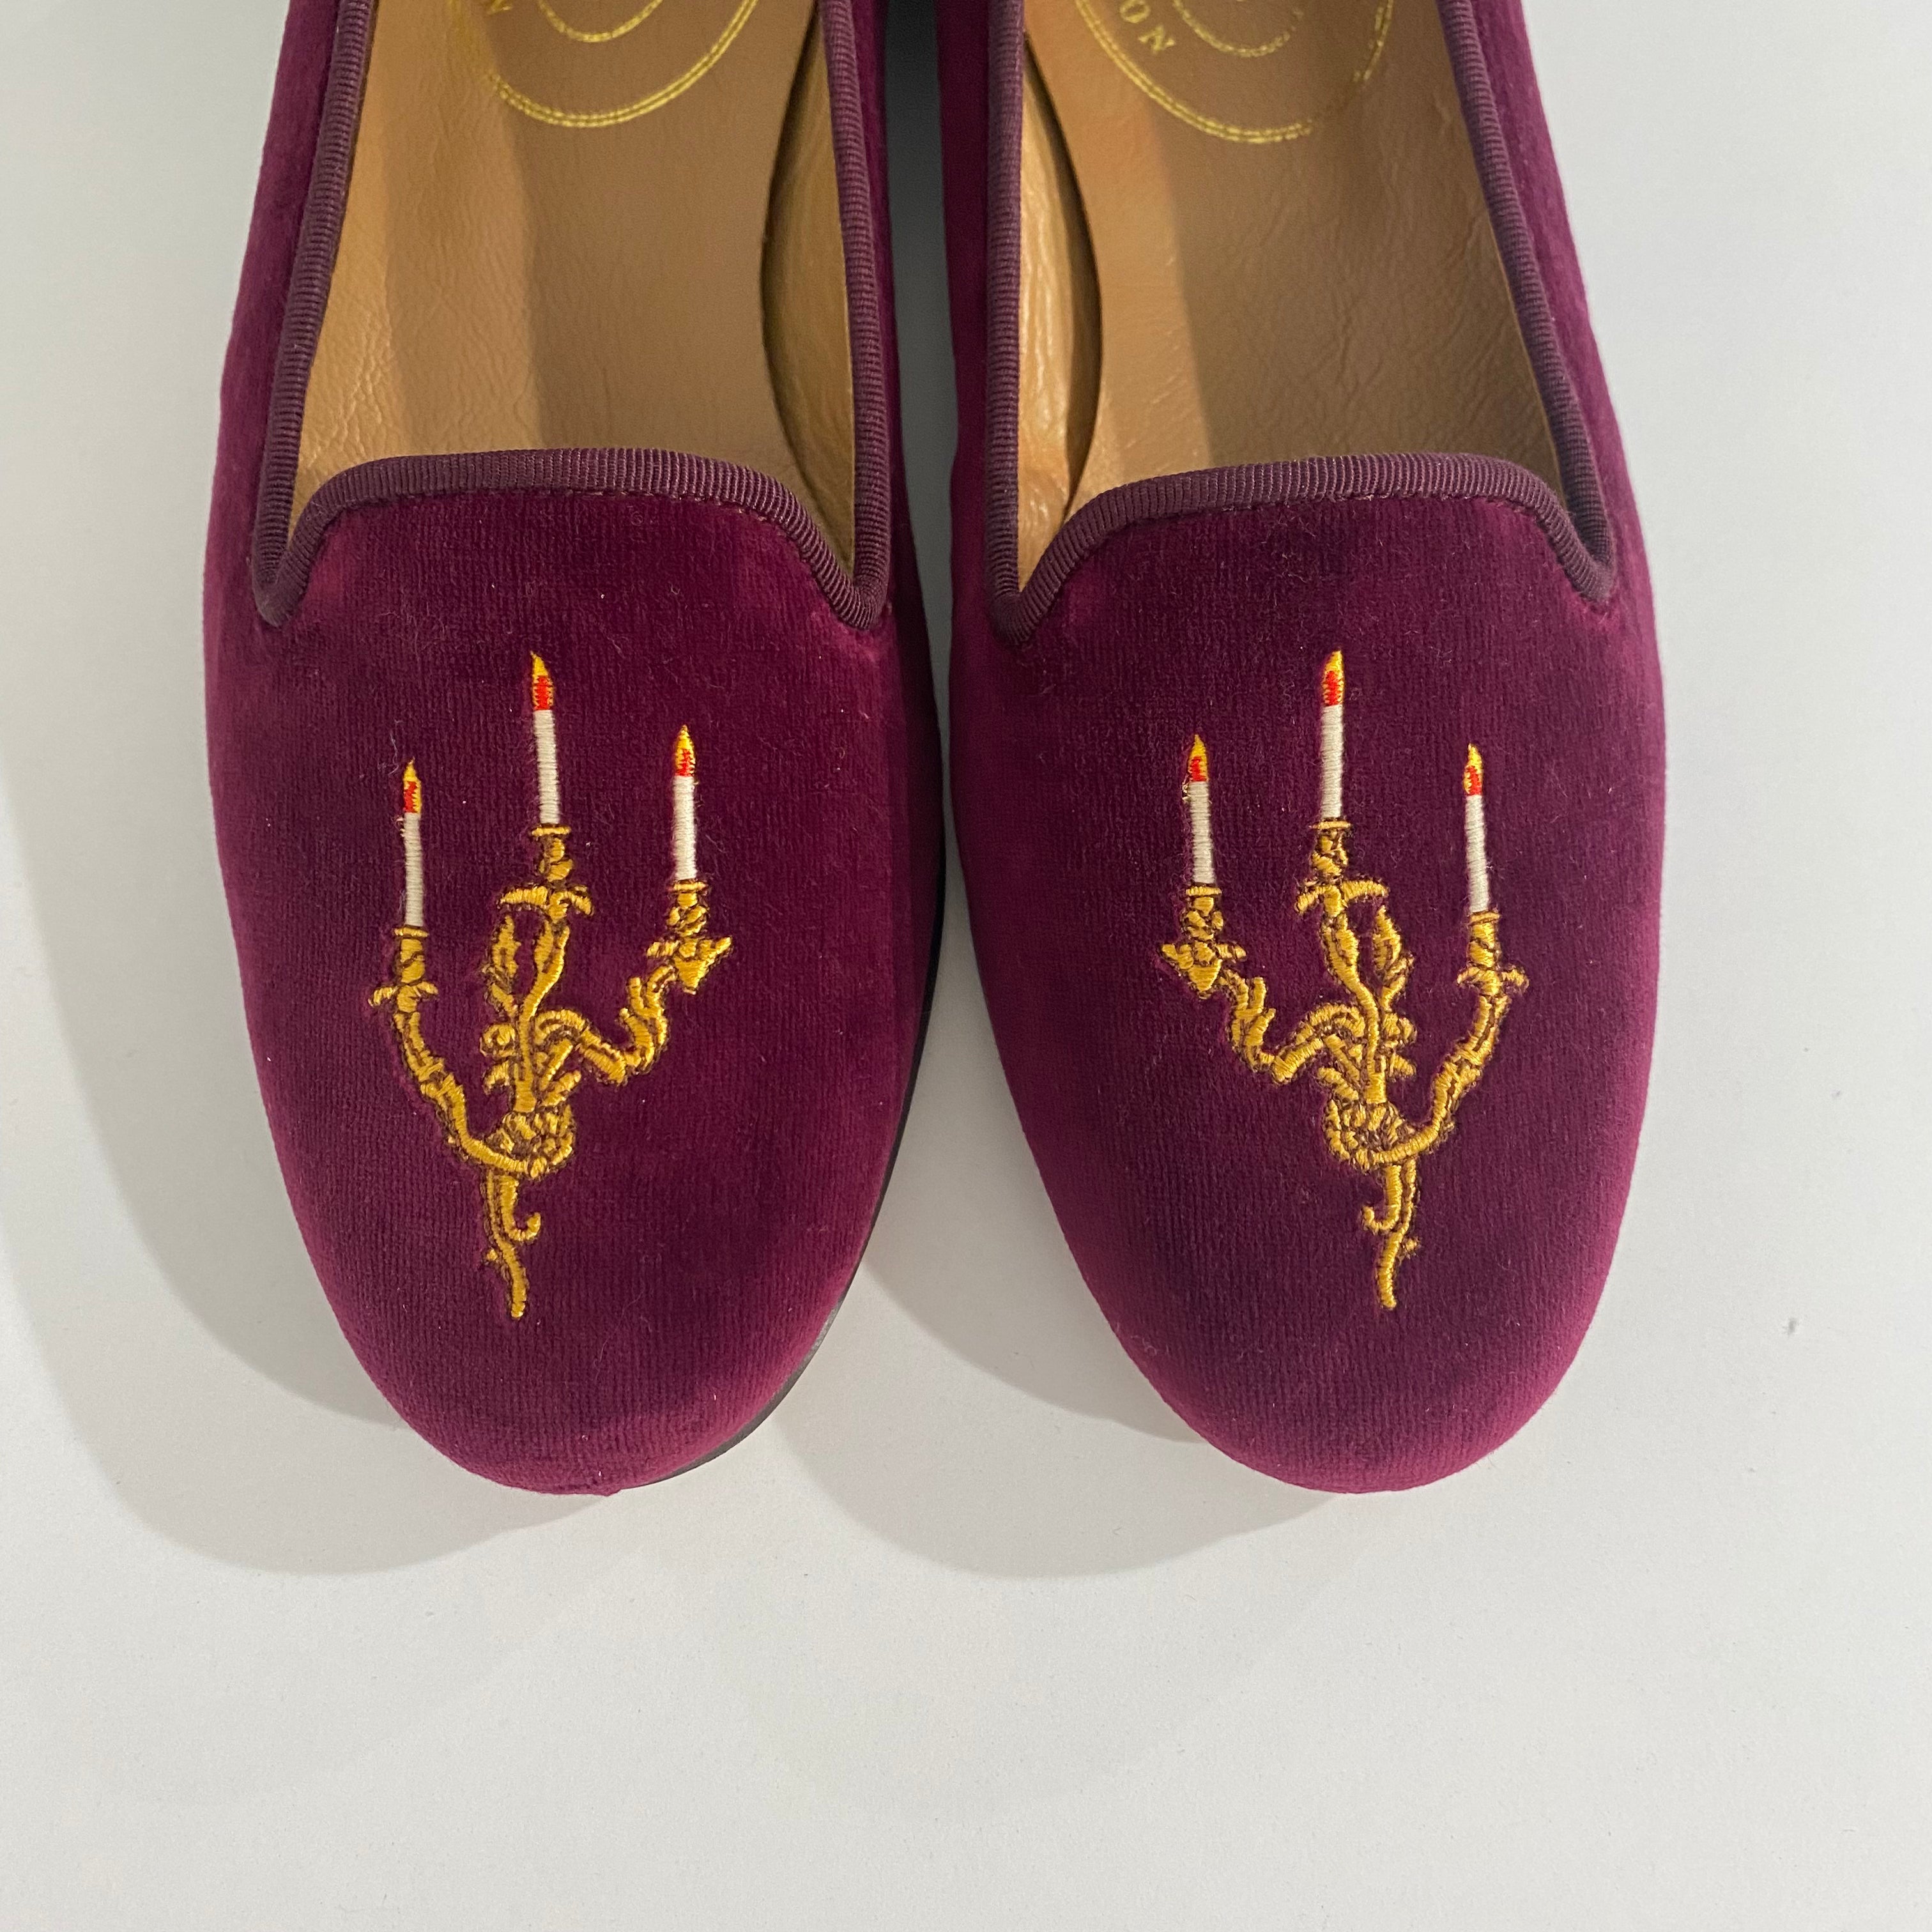 Stubbs & Wootton Velvet Candle Loafers size 10